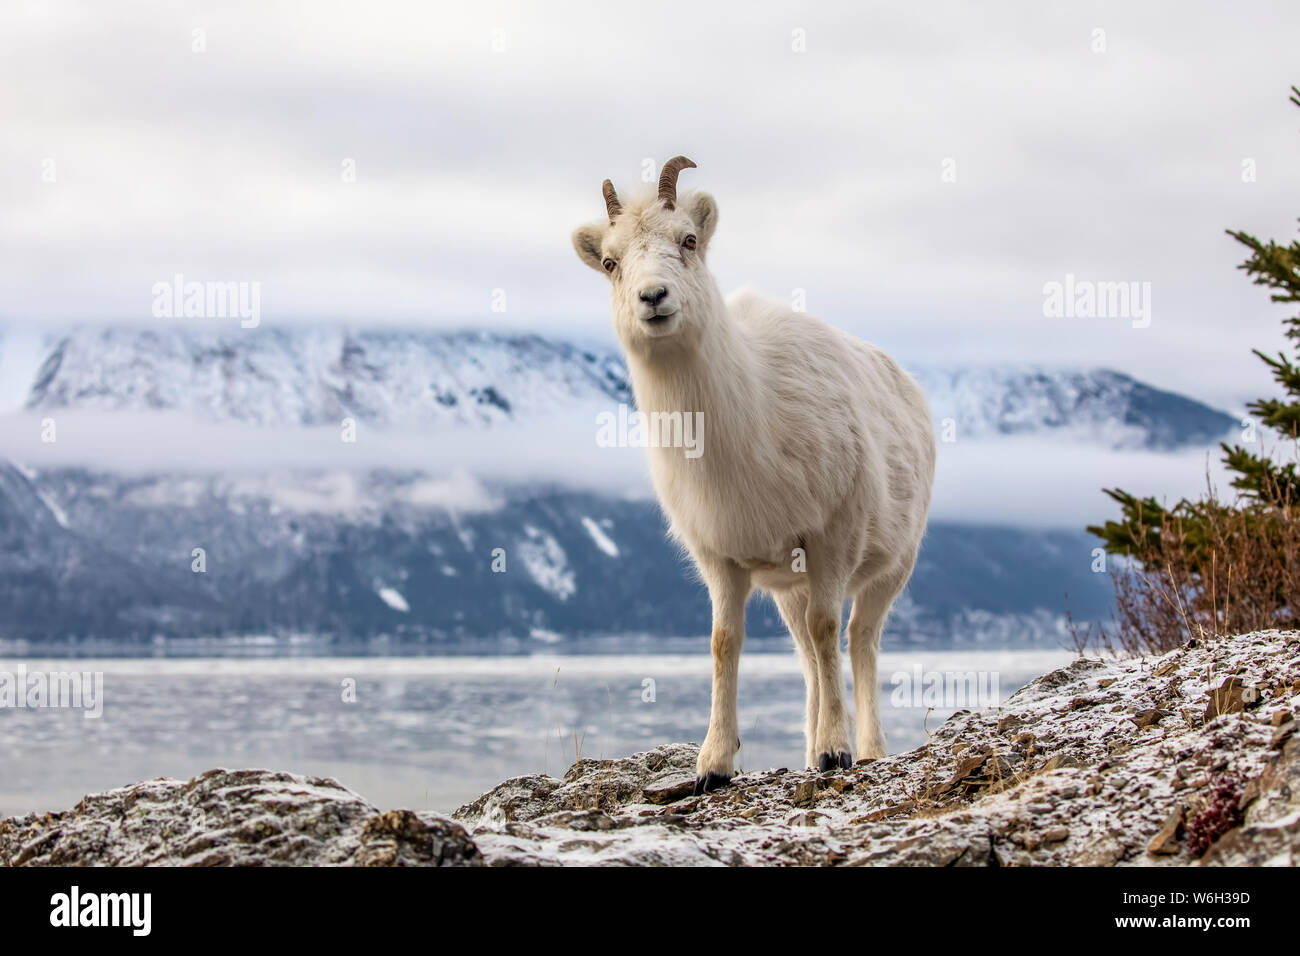 Dall sheep ewe (Ovis dalli) on the rocky hillside overlooking Turnagain Arm and near the Seward Highway at MP 107 in the winter with snow Stock Photo